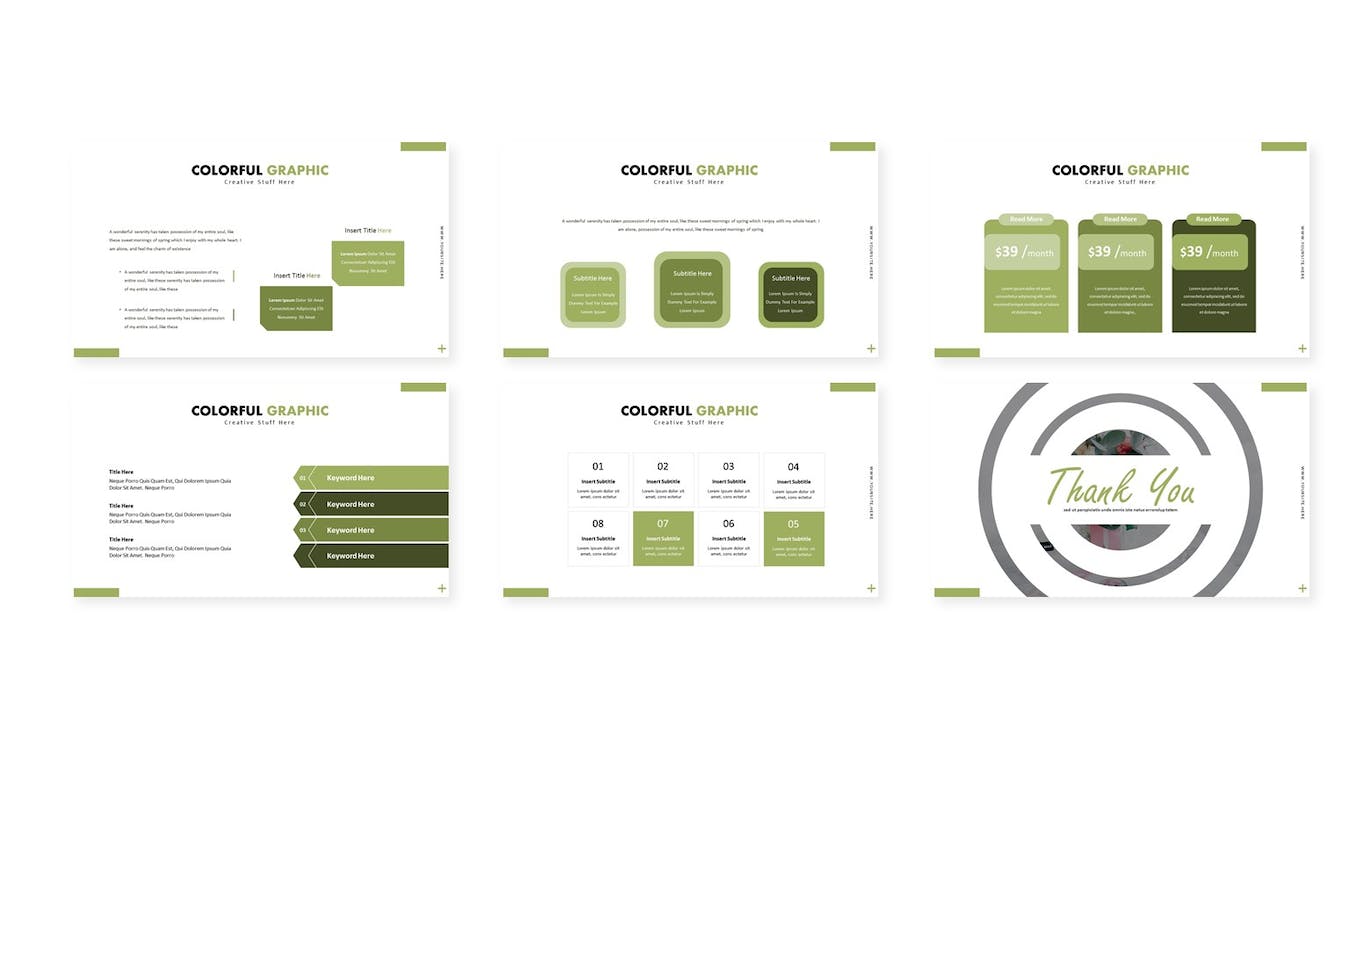 Set of images of gorgeous presentation template slides in green colors.